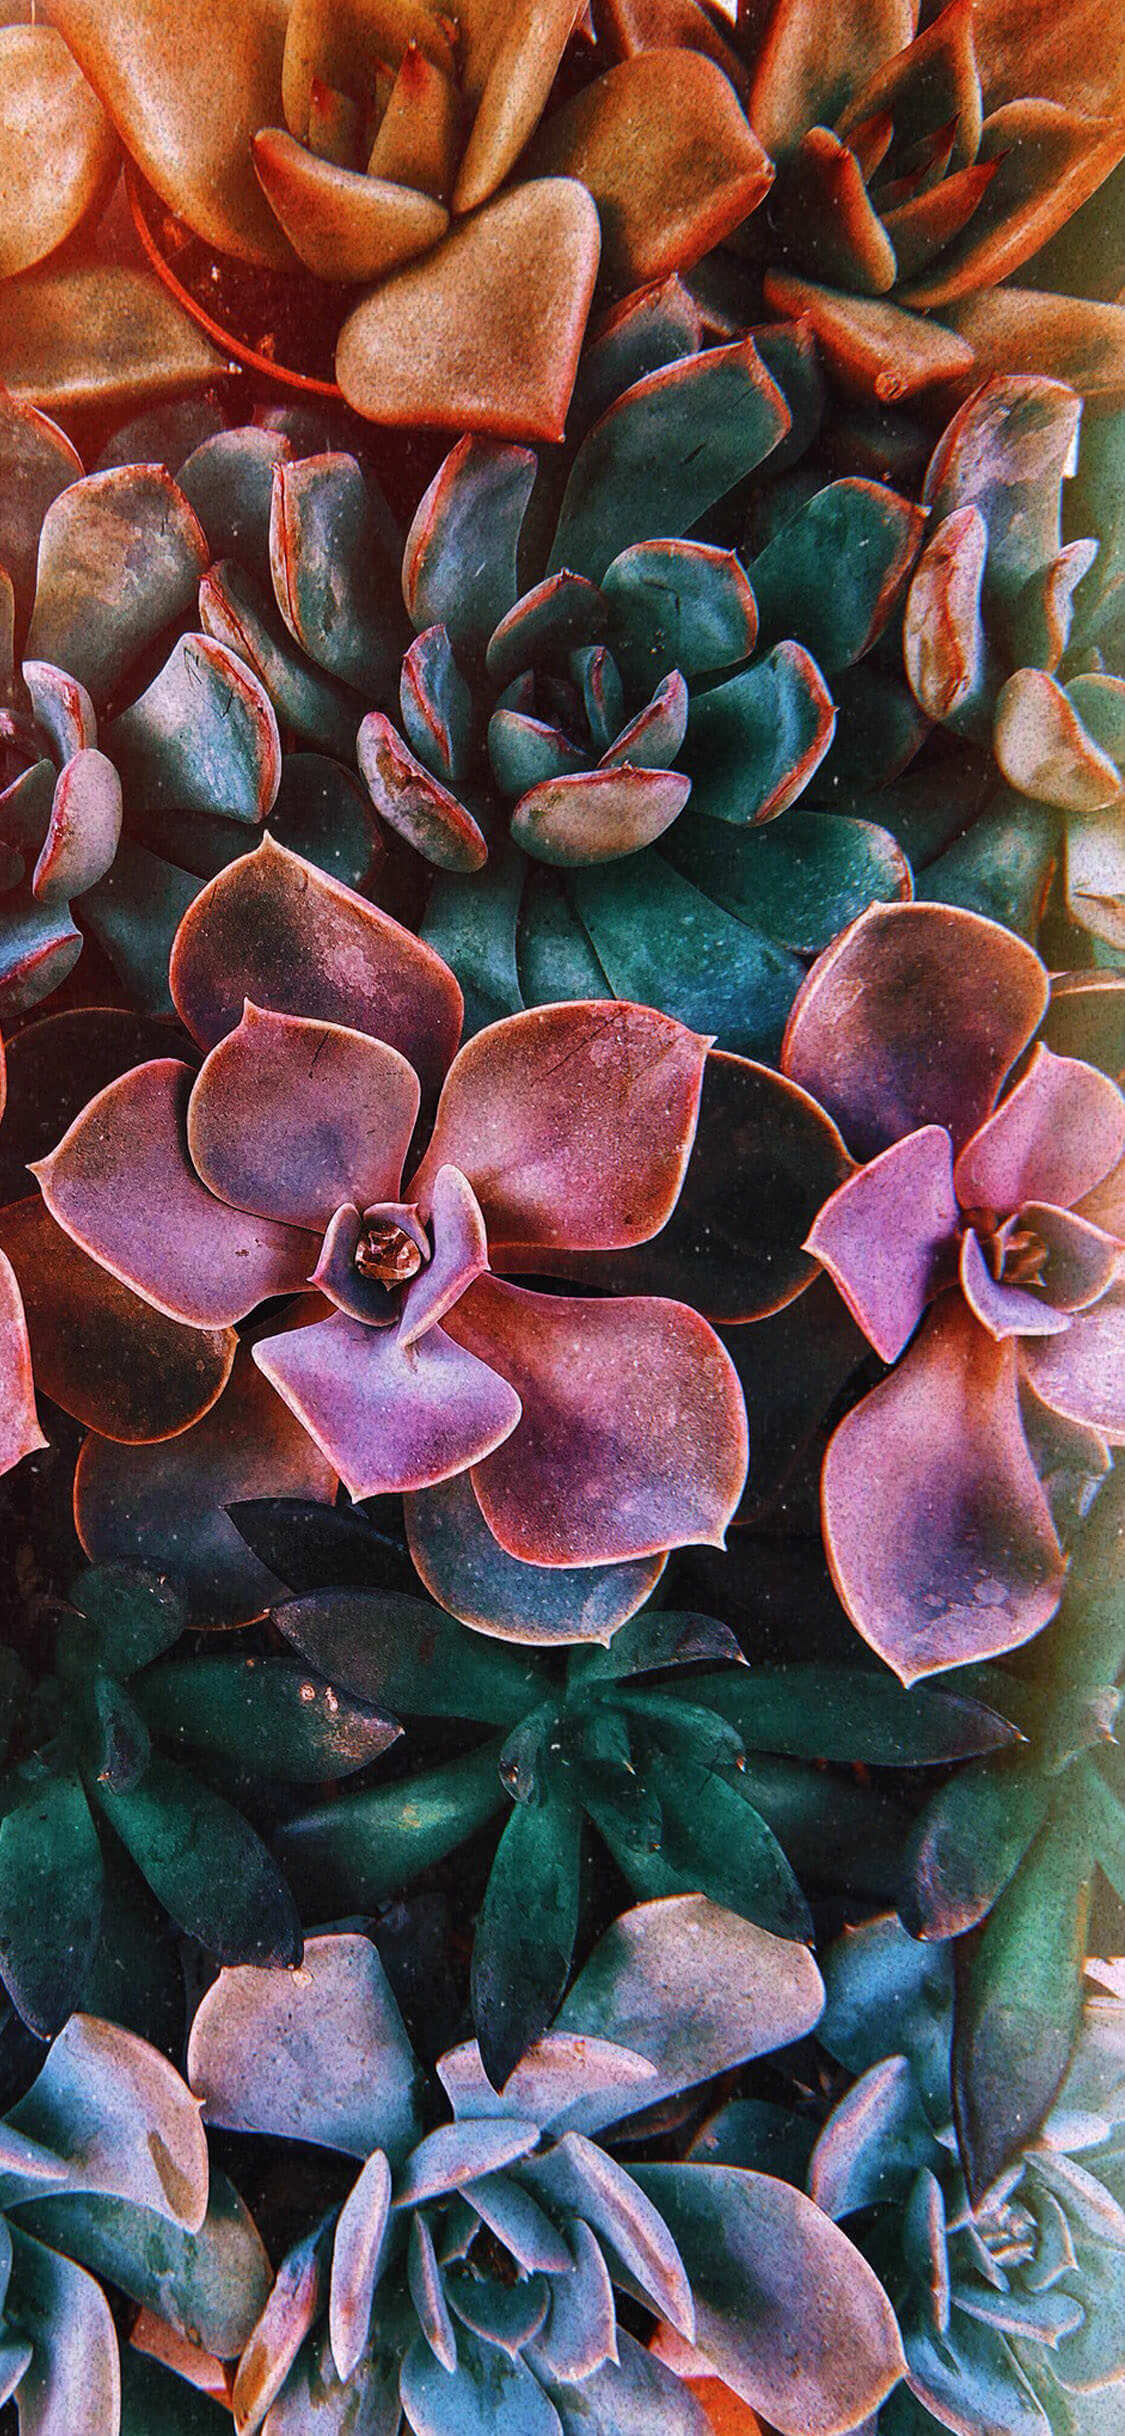 Succulent Iphone Xs Wallpapers Wallpaper Cave Explore succulent97's (@succulent97) posts on pholder | see more posts from u/succulent97 about plants, succulents and whatsthisplant. succulent iphone xs wallpapers